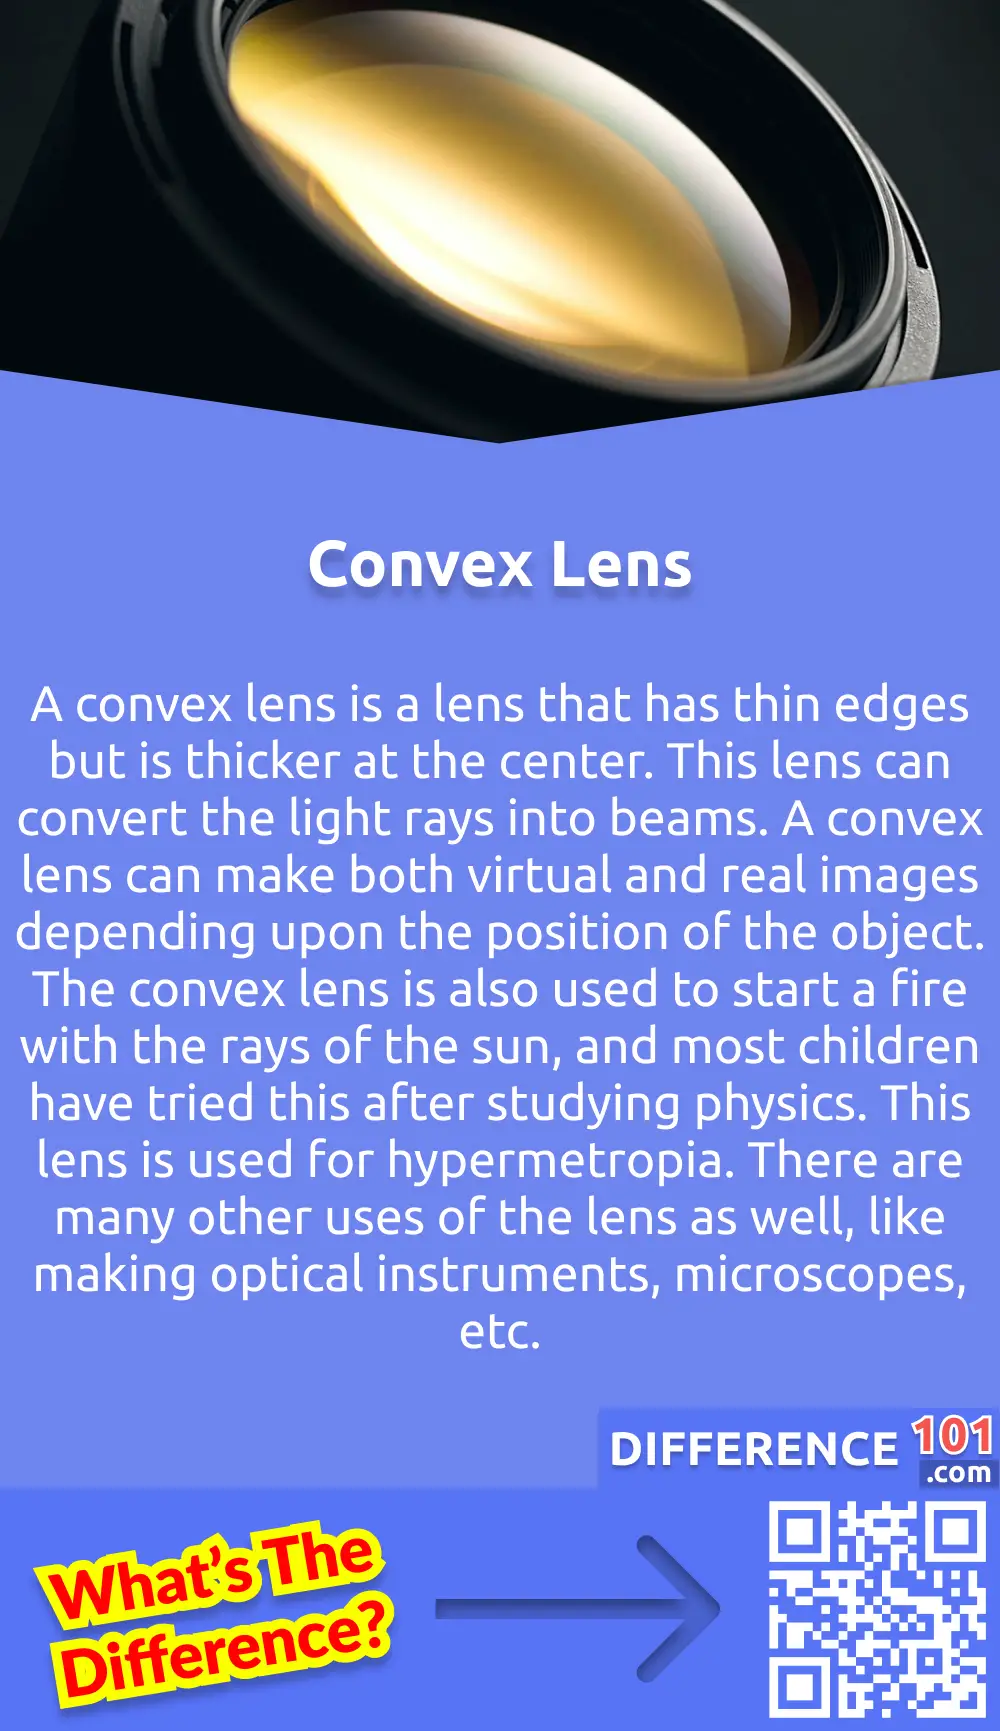 What are Convex Lens? A convex lens is a lens that has thin edges but is thicker at the center. This lens can convert the light rays into beams. A convex lens can make both virtual and real images depending upon the position of the object. The convex lens is also used to start a fire with the rays of the sun, and most children have tried this after studying physics. This lens is used for hypermetropia. There are many other uses of the lens as well, like making optical instruments, microscopes, etc.